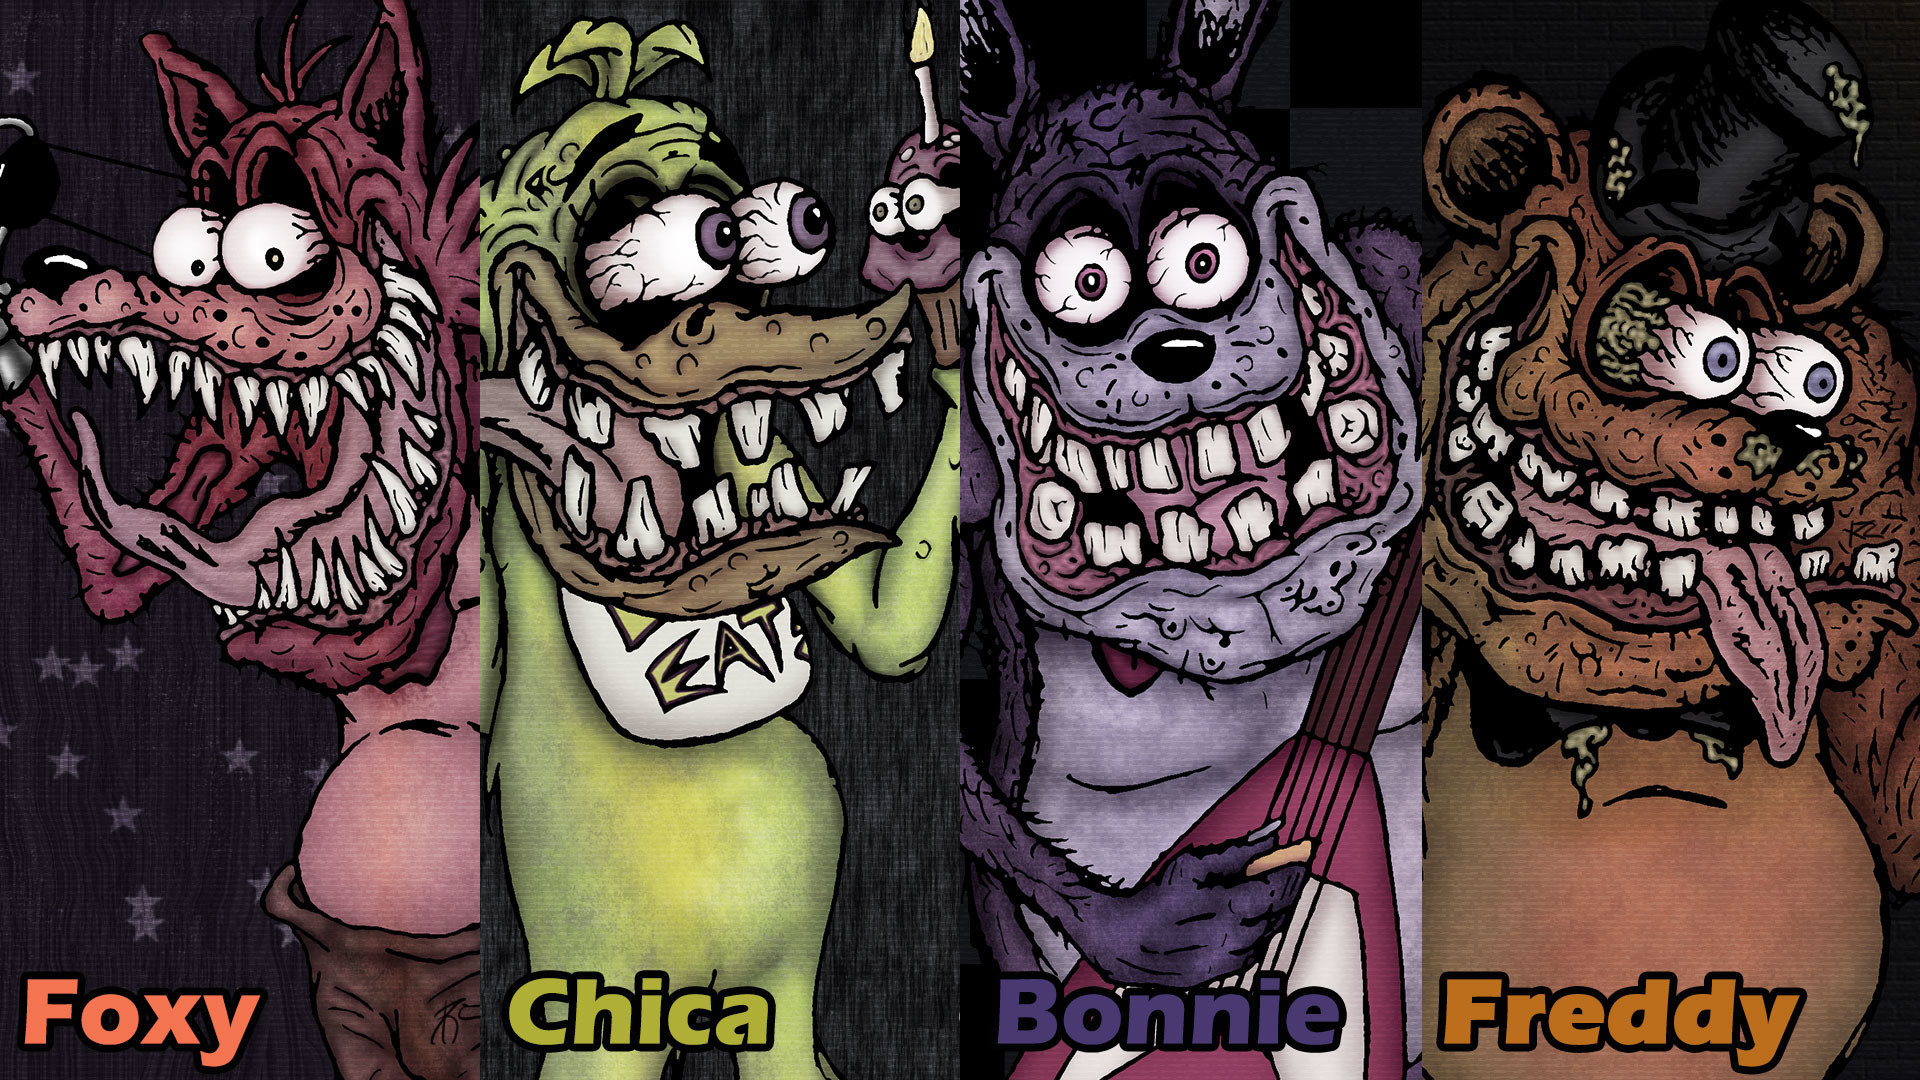 1920x1080 ... Five Nights at Freddy - Ed Roth Style (Wallpaper) by SestrenNK